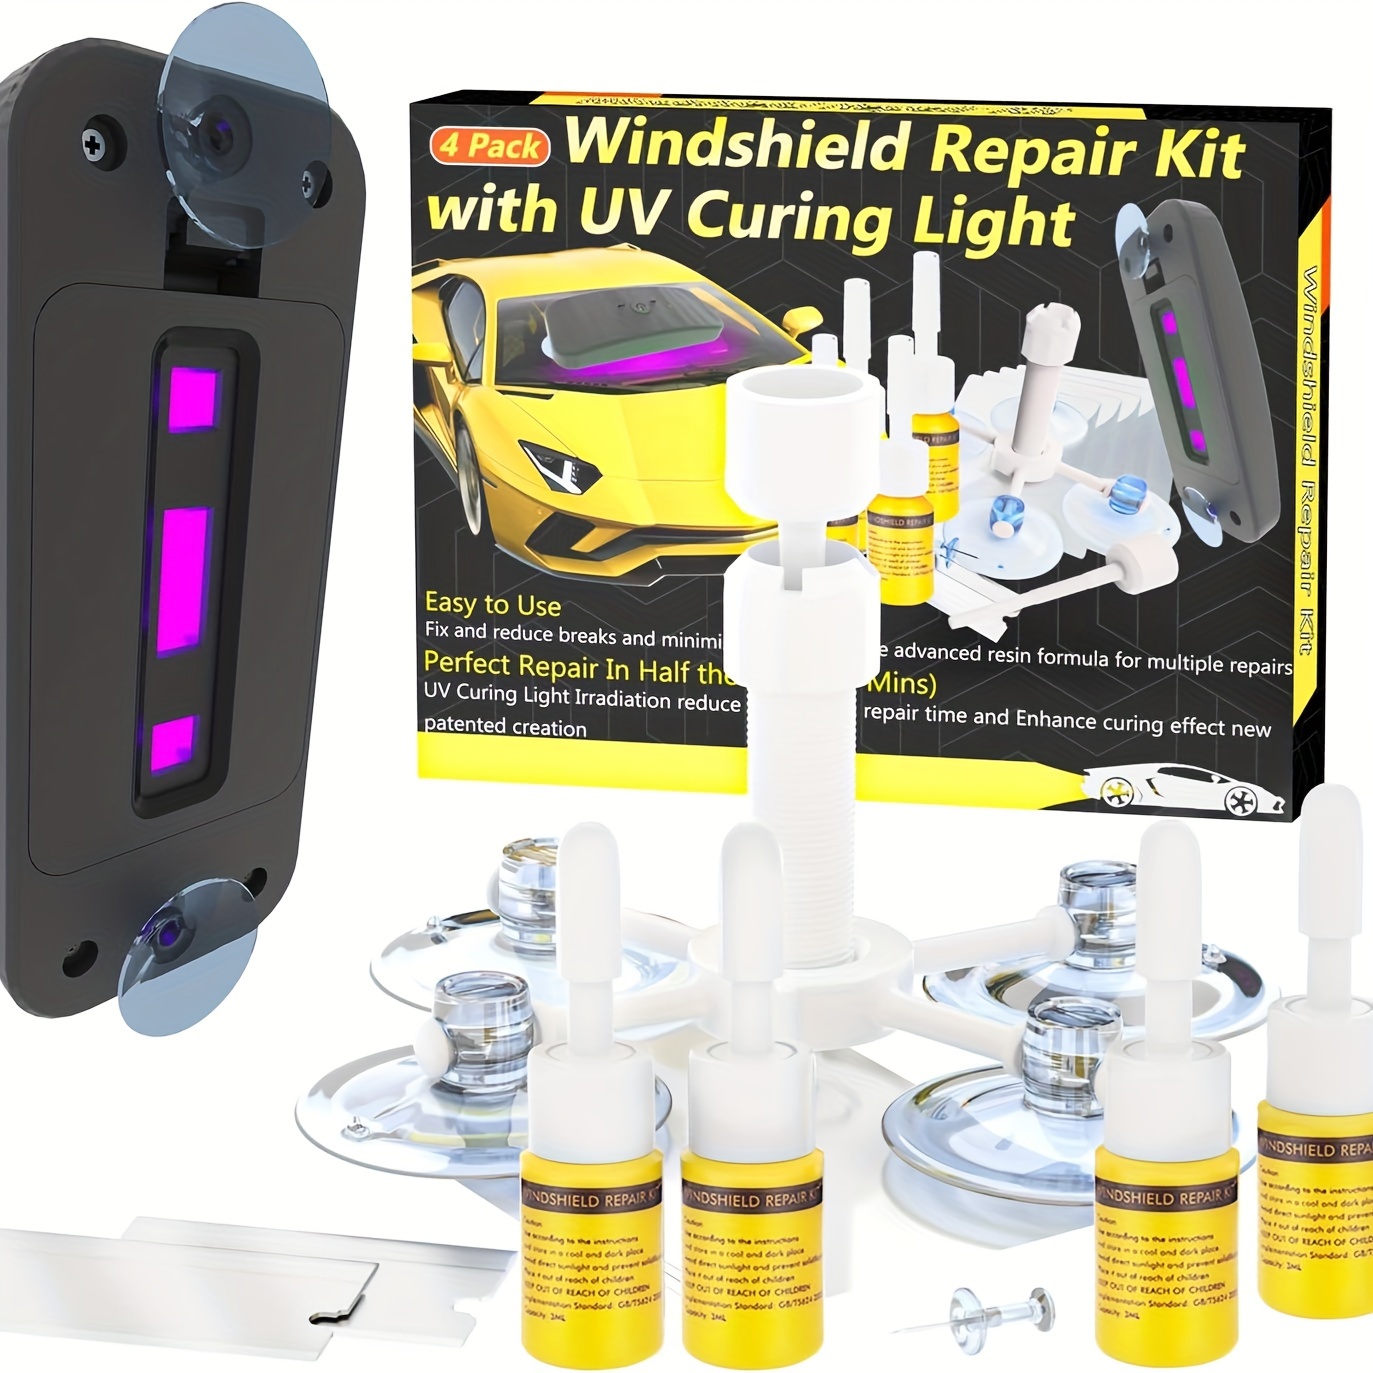 

Windshield Repair Kit, Windshield Crack Repair Kit, Efficient Glass Chip Repair Kit With Suction Cup Uv Curing Light, 4 Bottles Fluid Glass Repair Liquid For Chips, Cracks, Star-shaped Crack, -eye